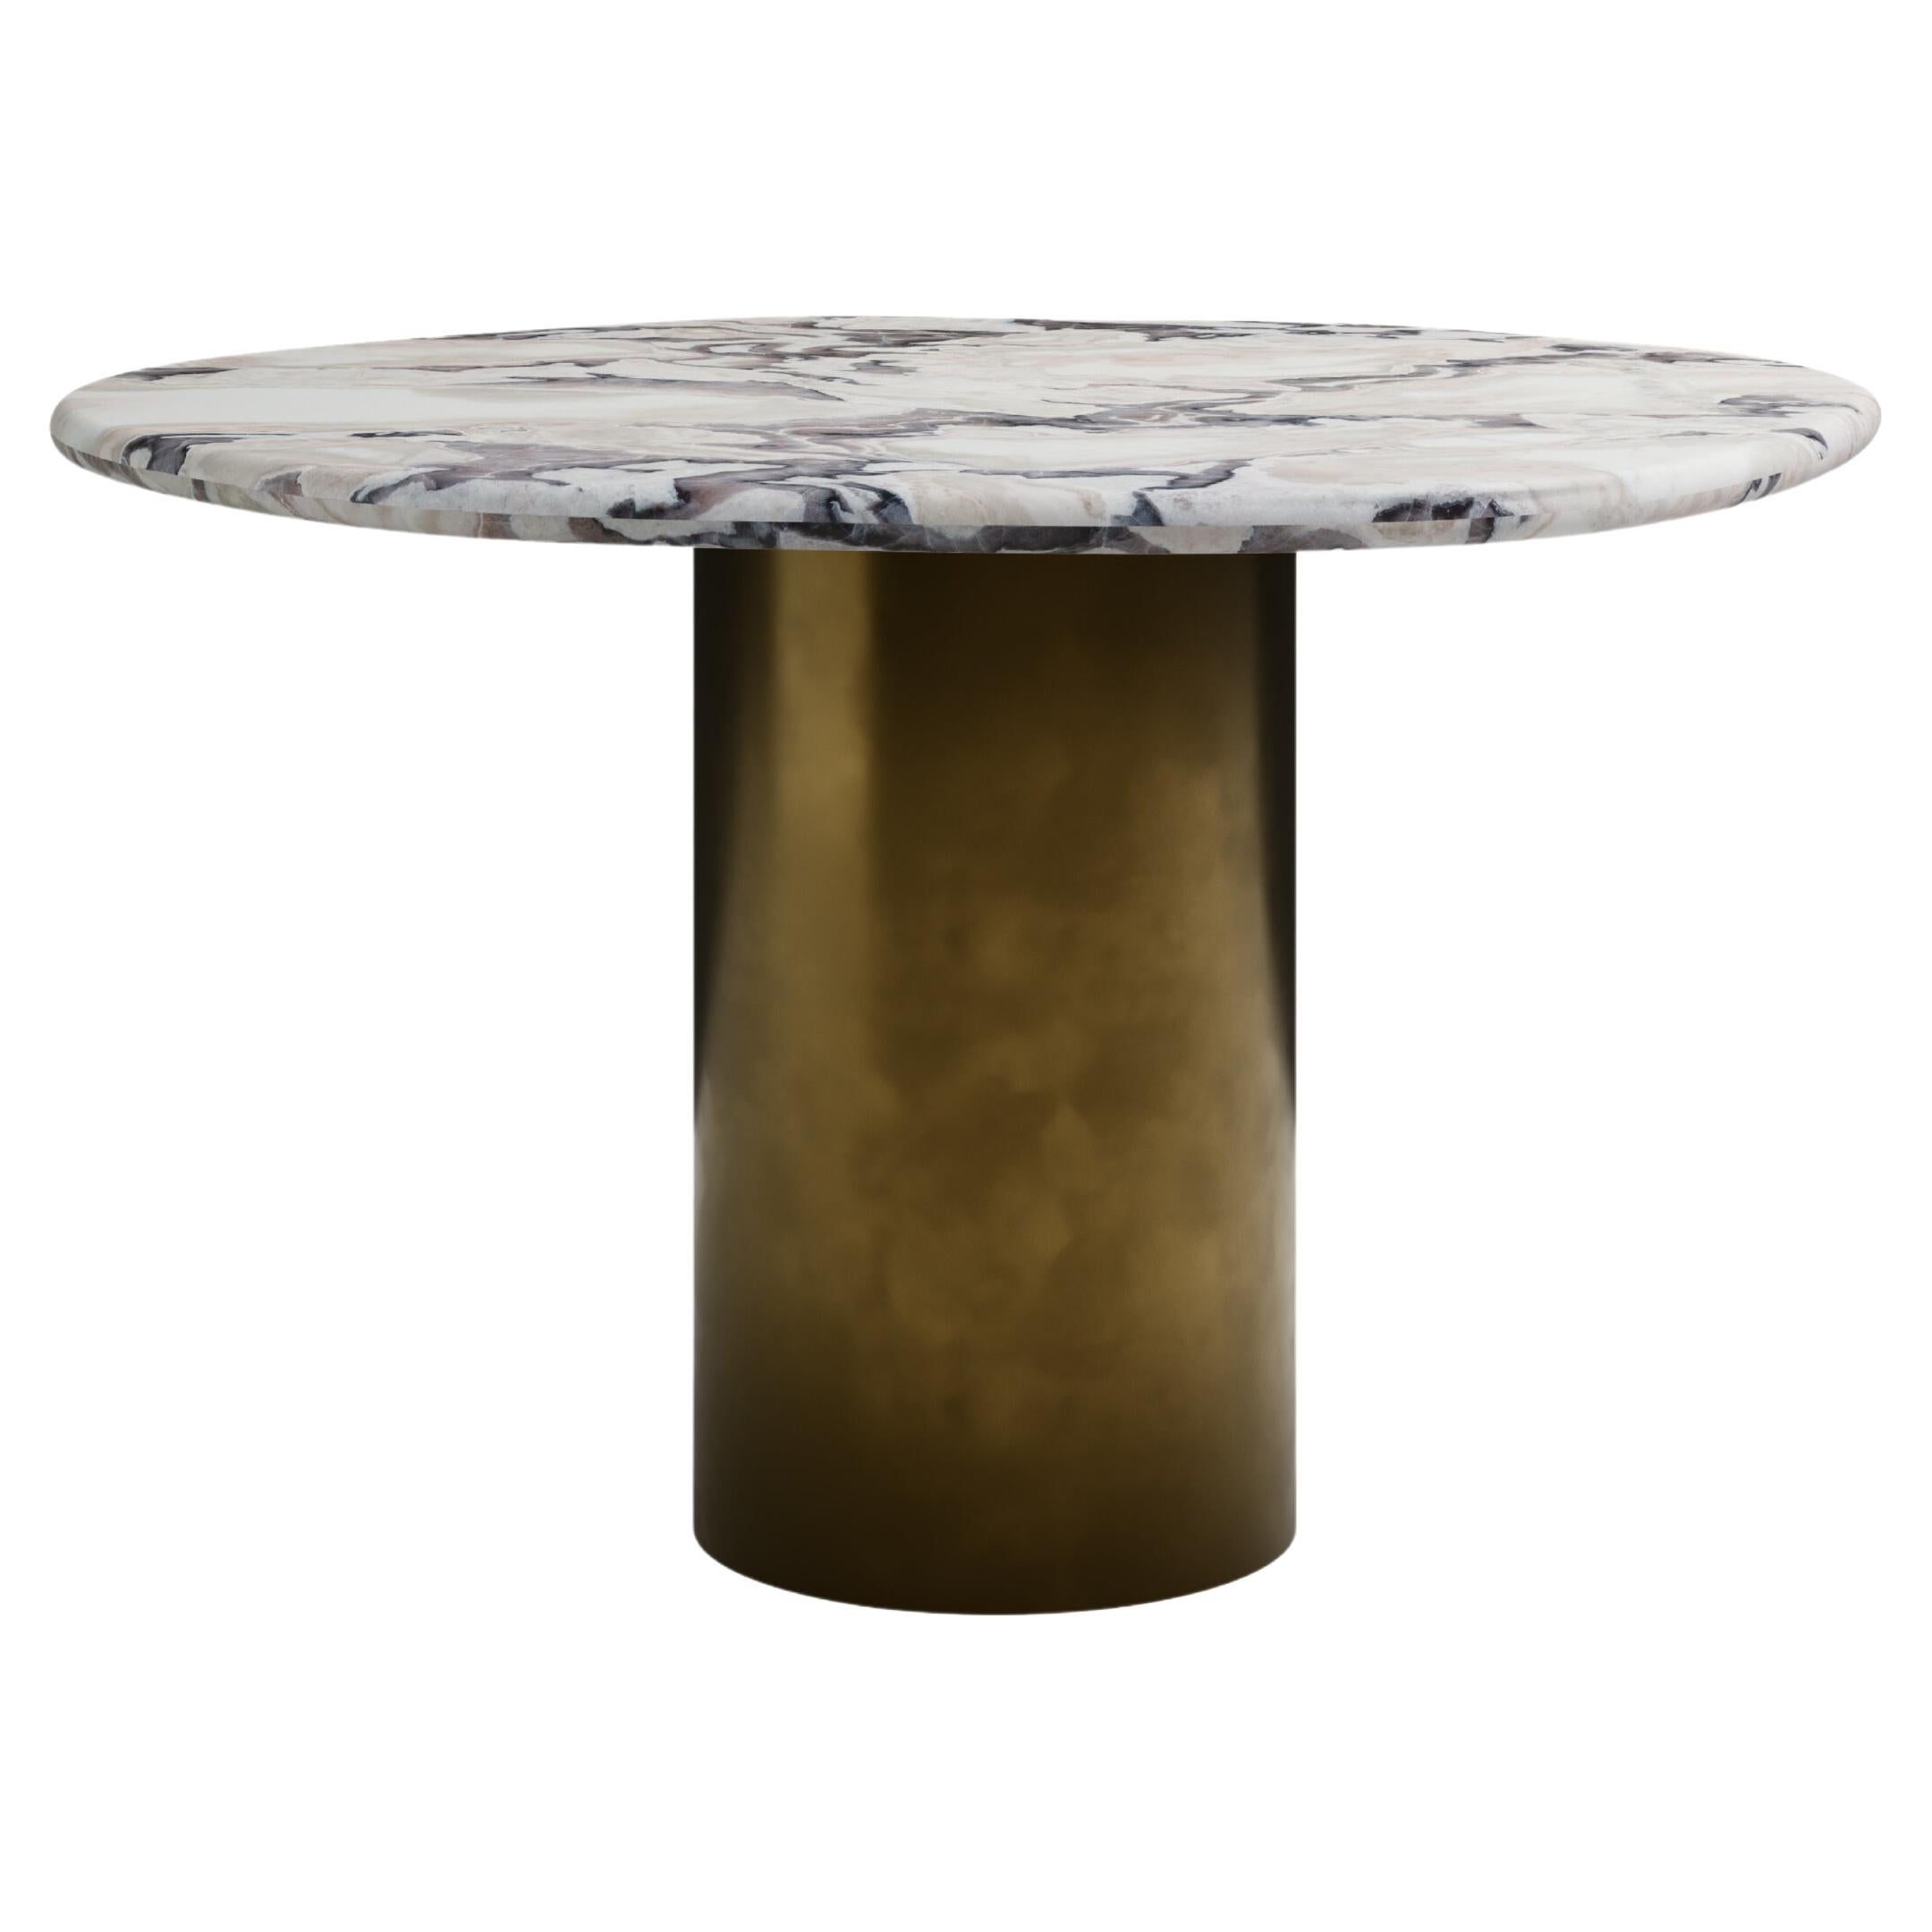 FORM(LA) Lago Round Dining Table 42”L x 42”W x 30”H Oyster Marble & Bronze For Sale